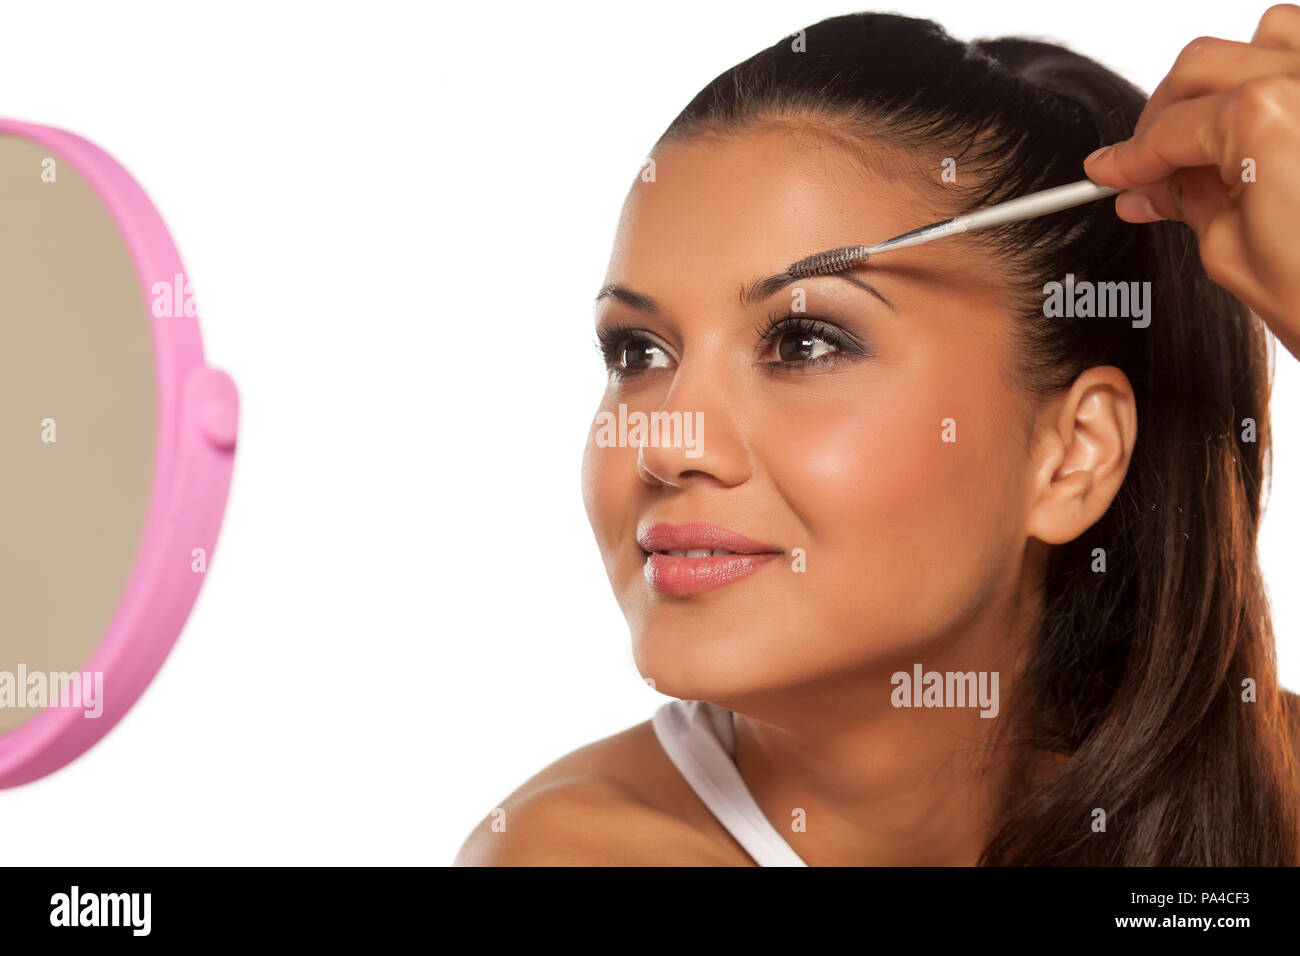 A young Indian woman shaping her eyebrows with a brush Stock Photo